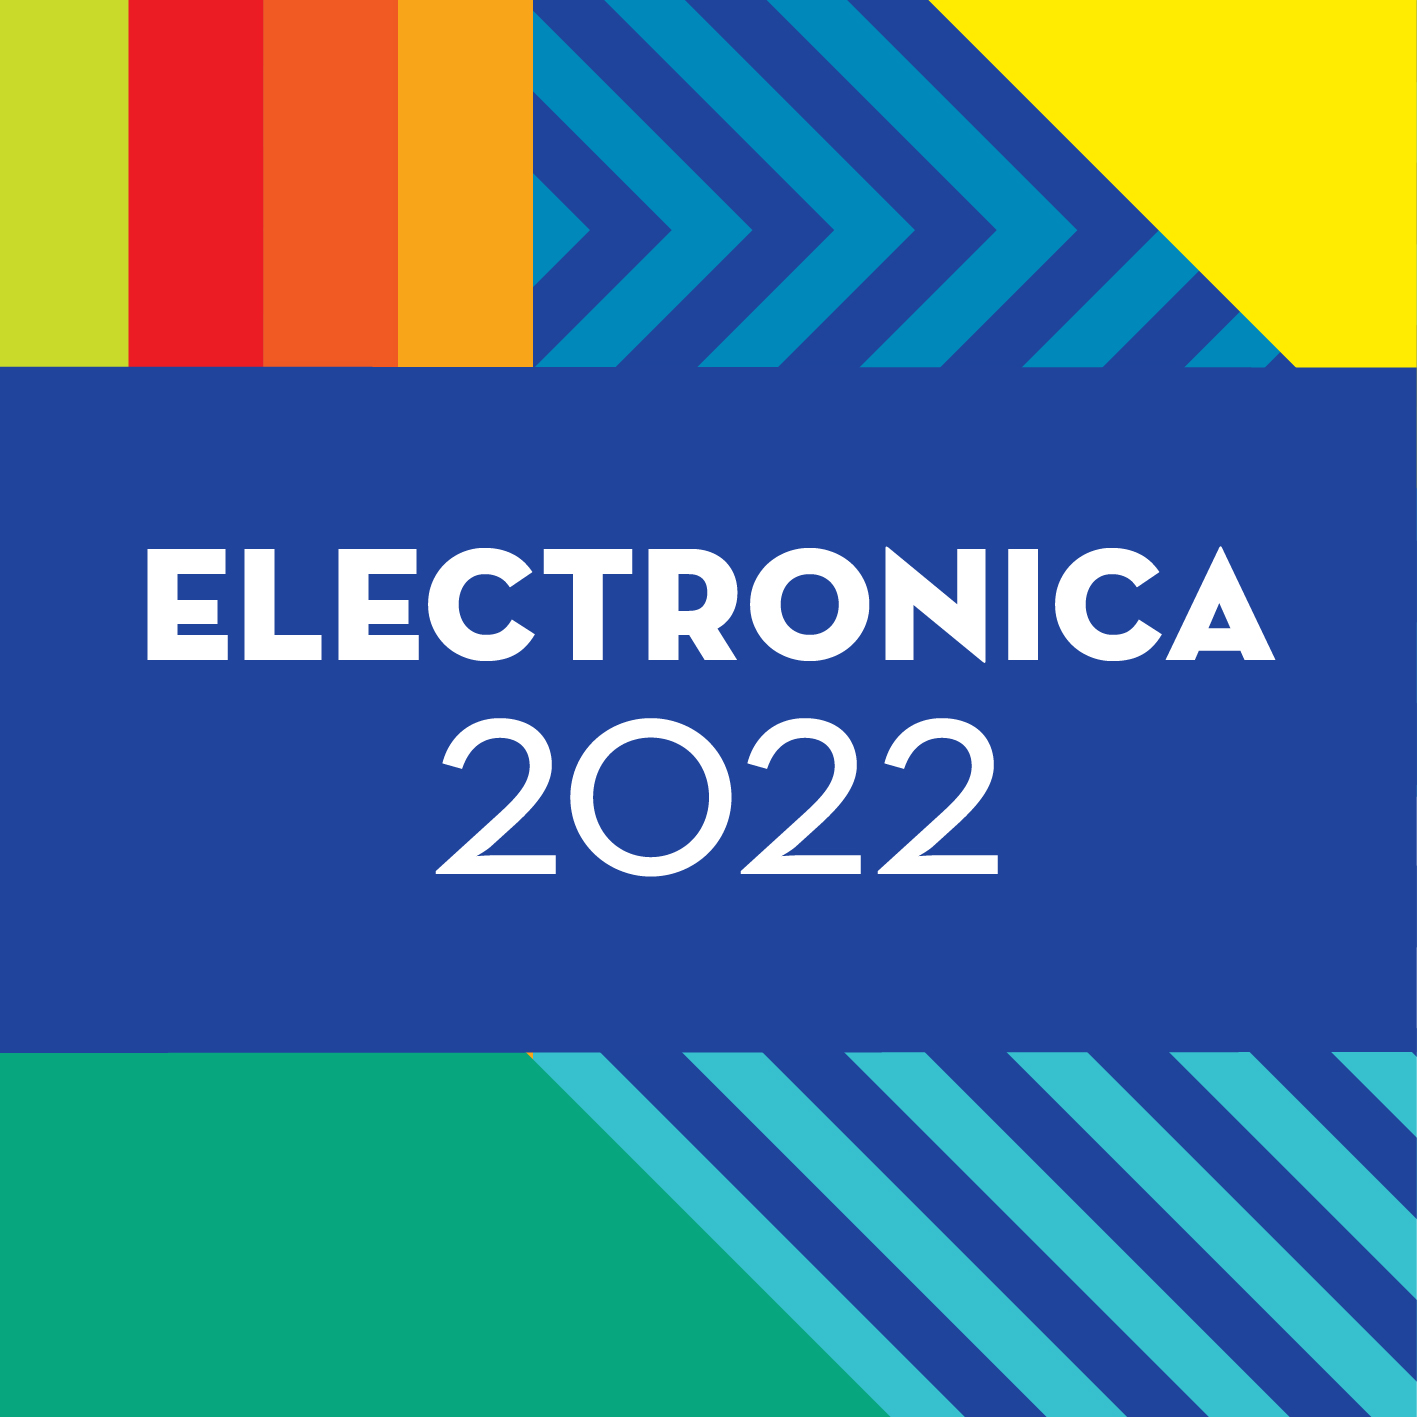 Technology That Brings People Together at Electronica